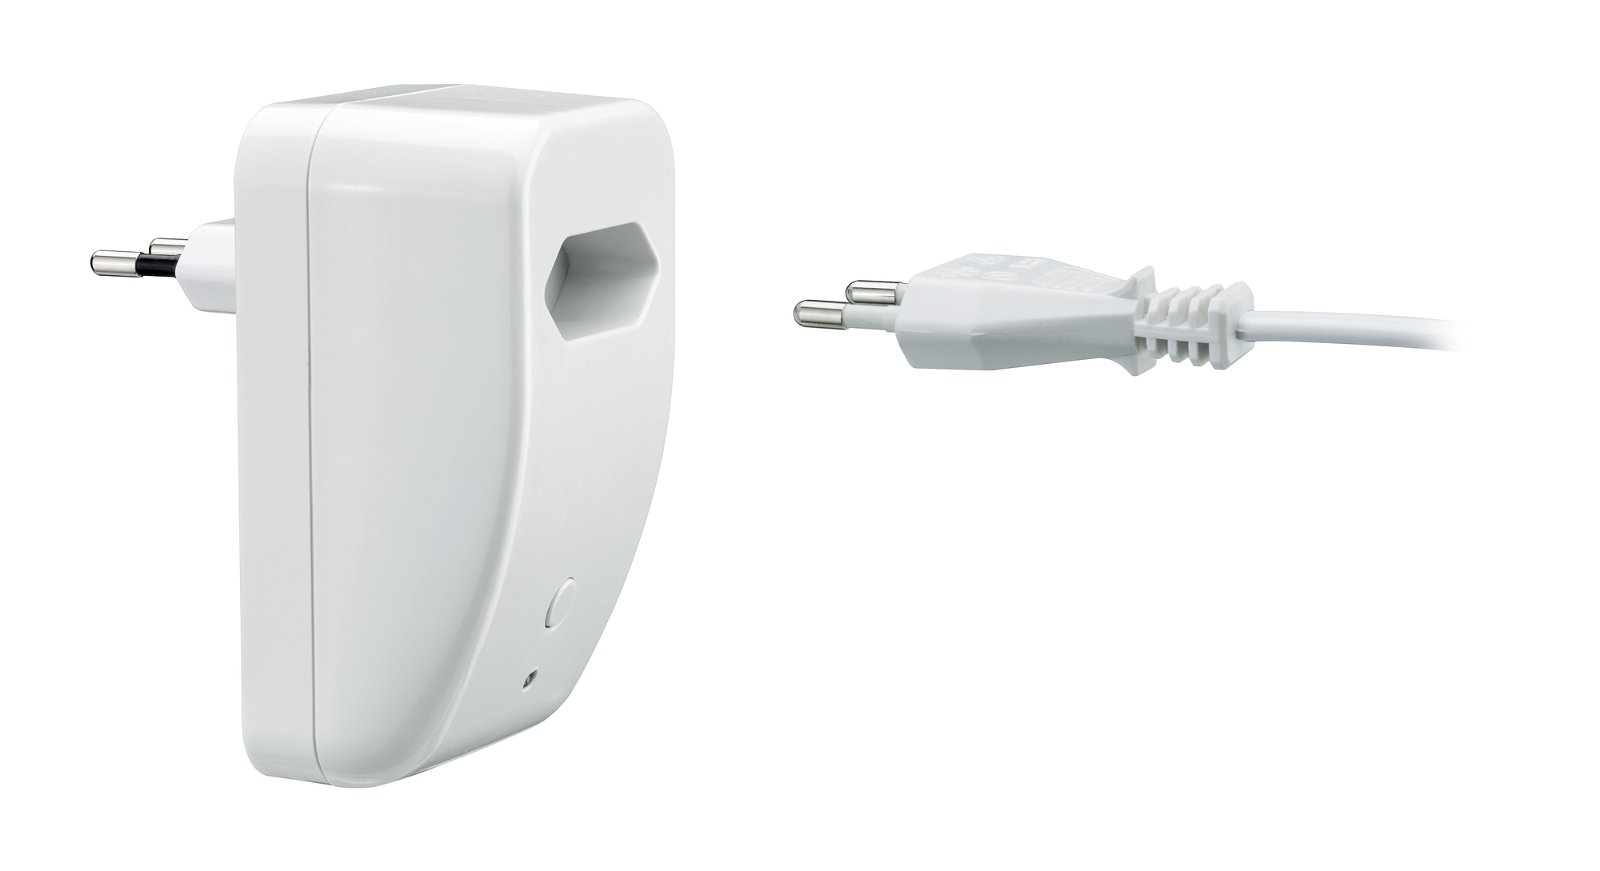 Smart Home EuroPlug dimming and switching adapter